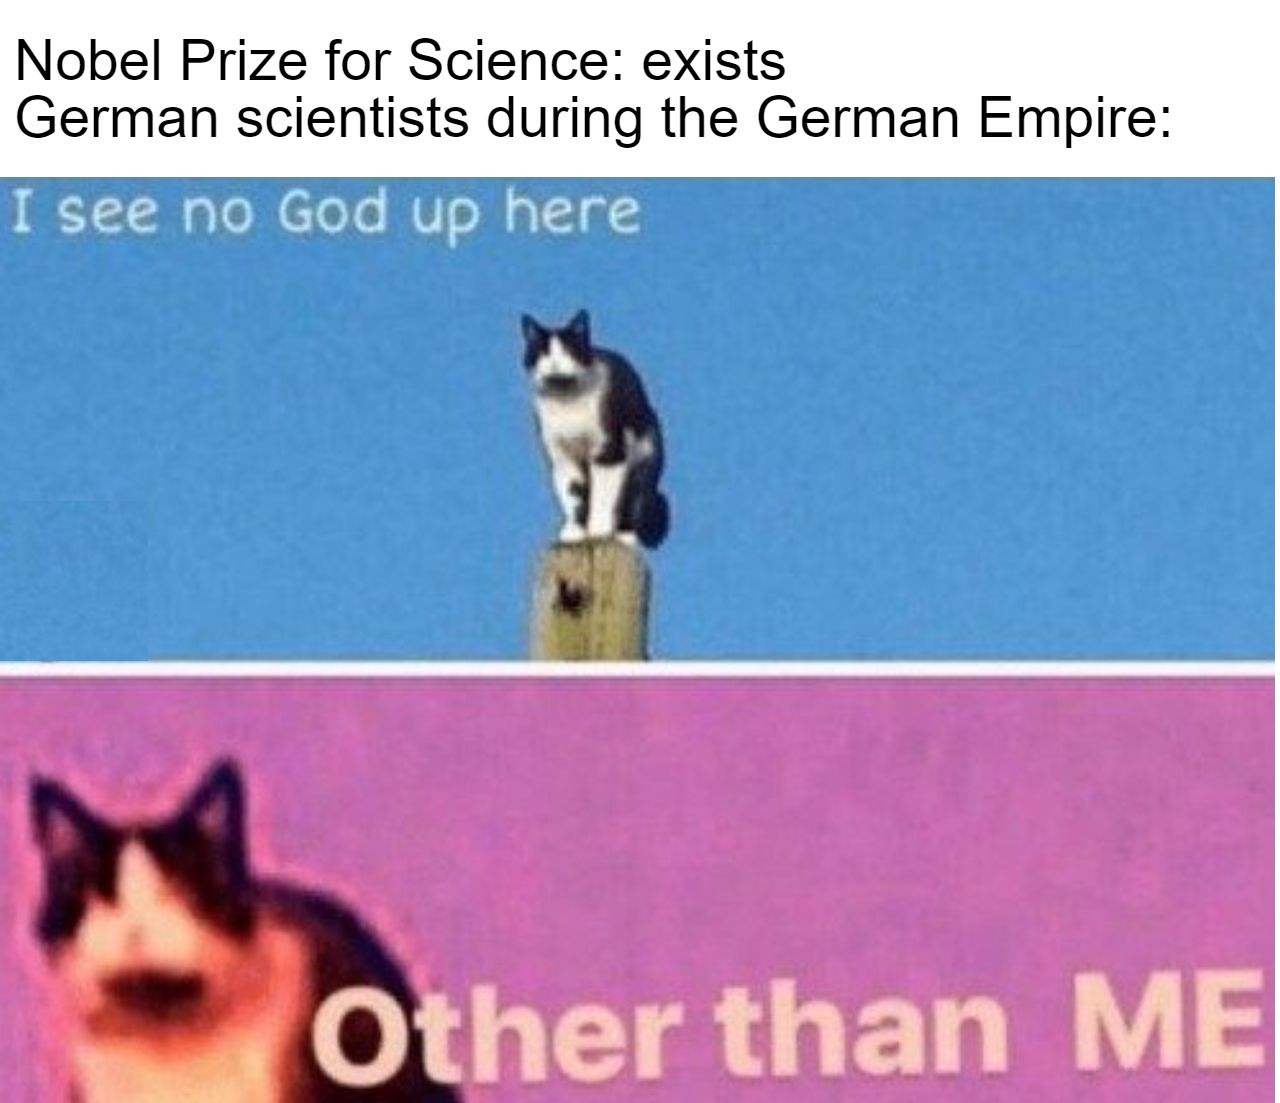 The German Empire won more Nobel Prizes for Science than any country during it's 47 years of existence